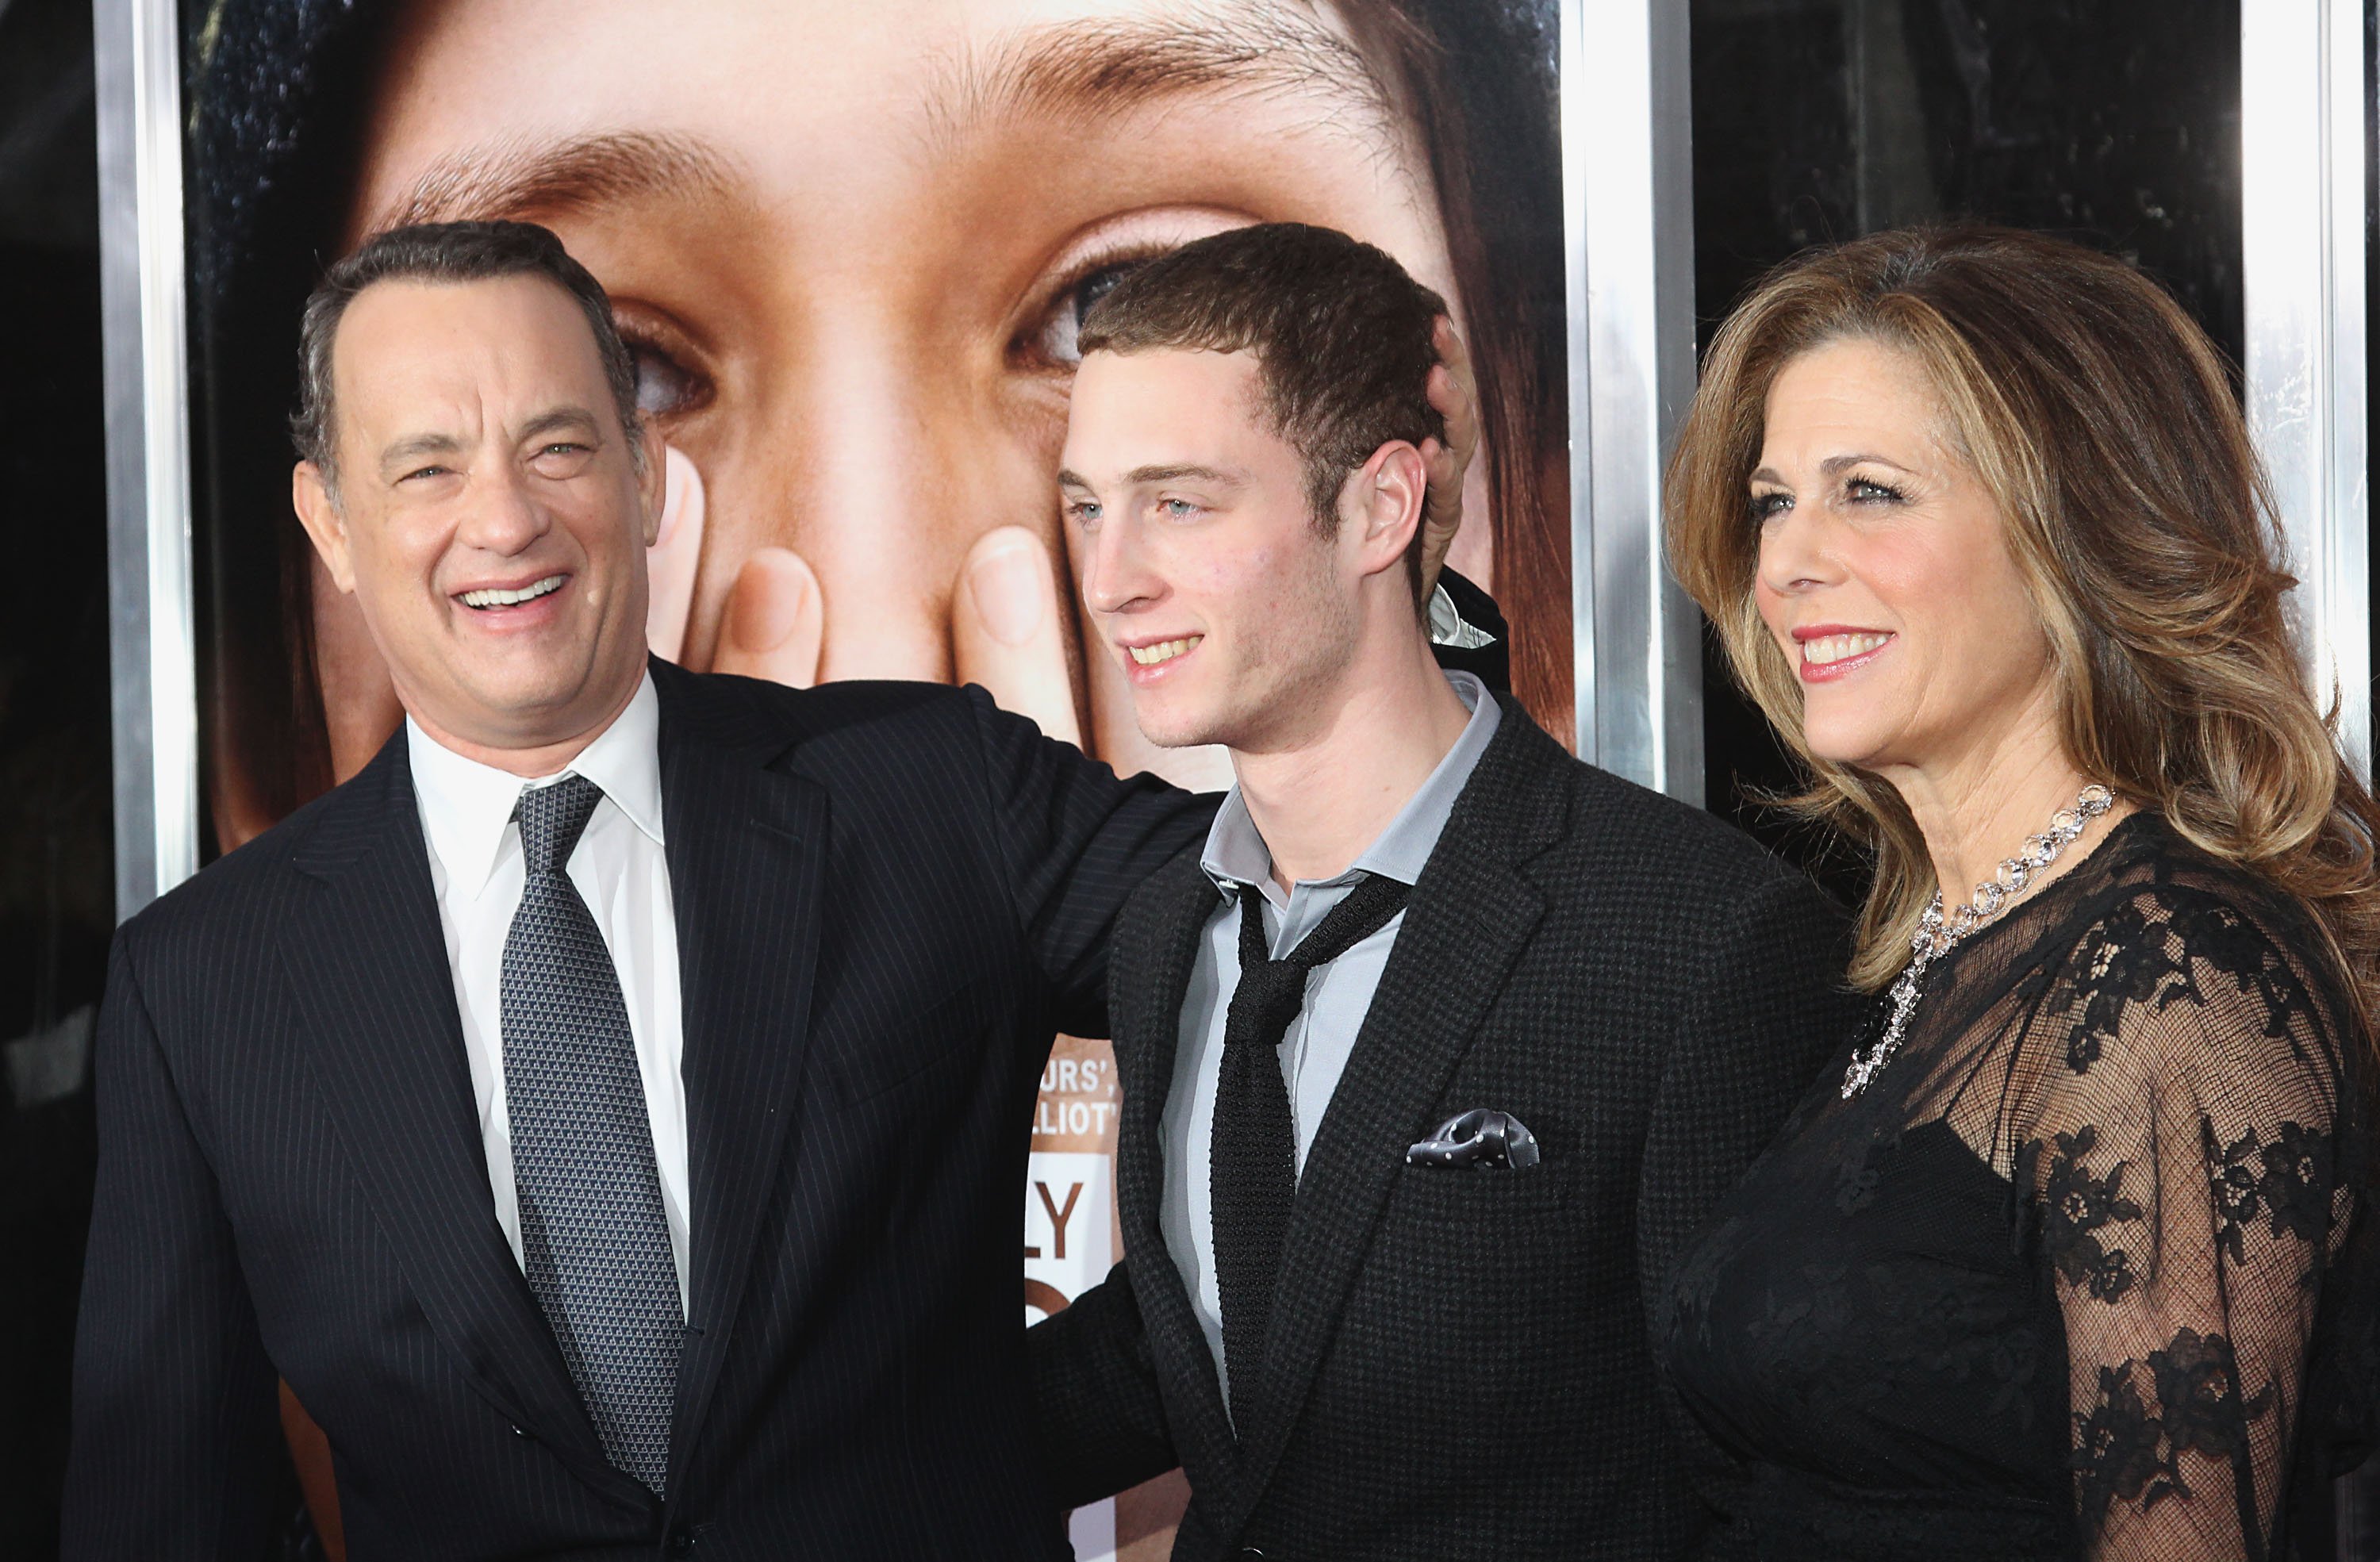 Tom Hanks, son Chester Hanks and Rita Wilson attend the "Extremely Loud & Incredibly Close" New York premiere at the Ziegfeld Theater on December 15, 2011. | Source: Getty Images